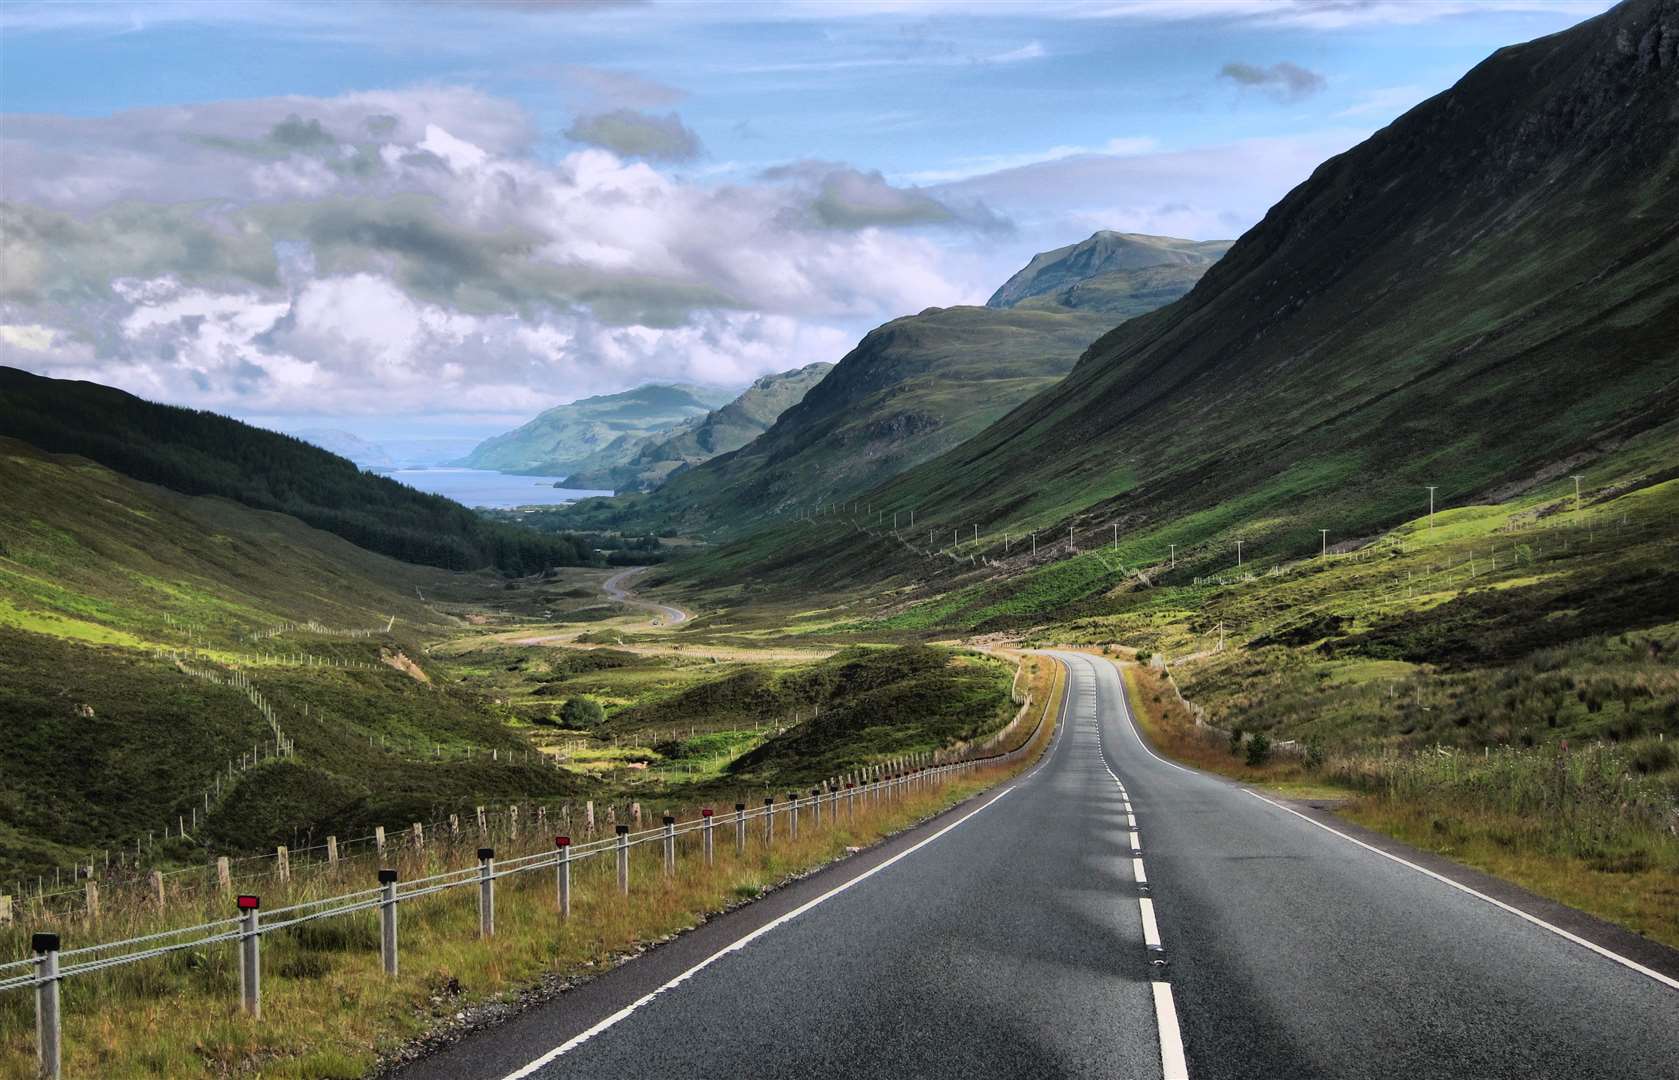 Should tourists have to pay more to enjoy the Highland scenery?